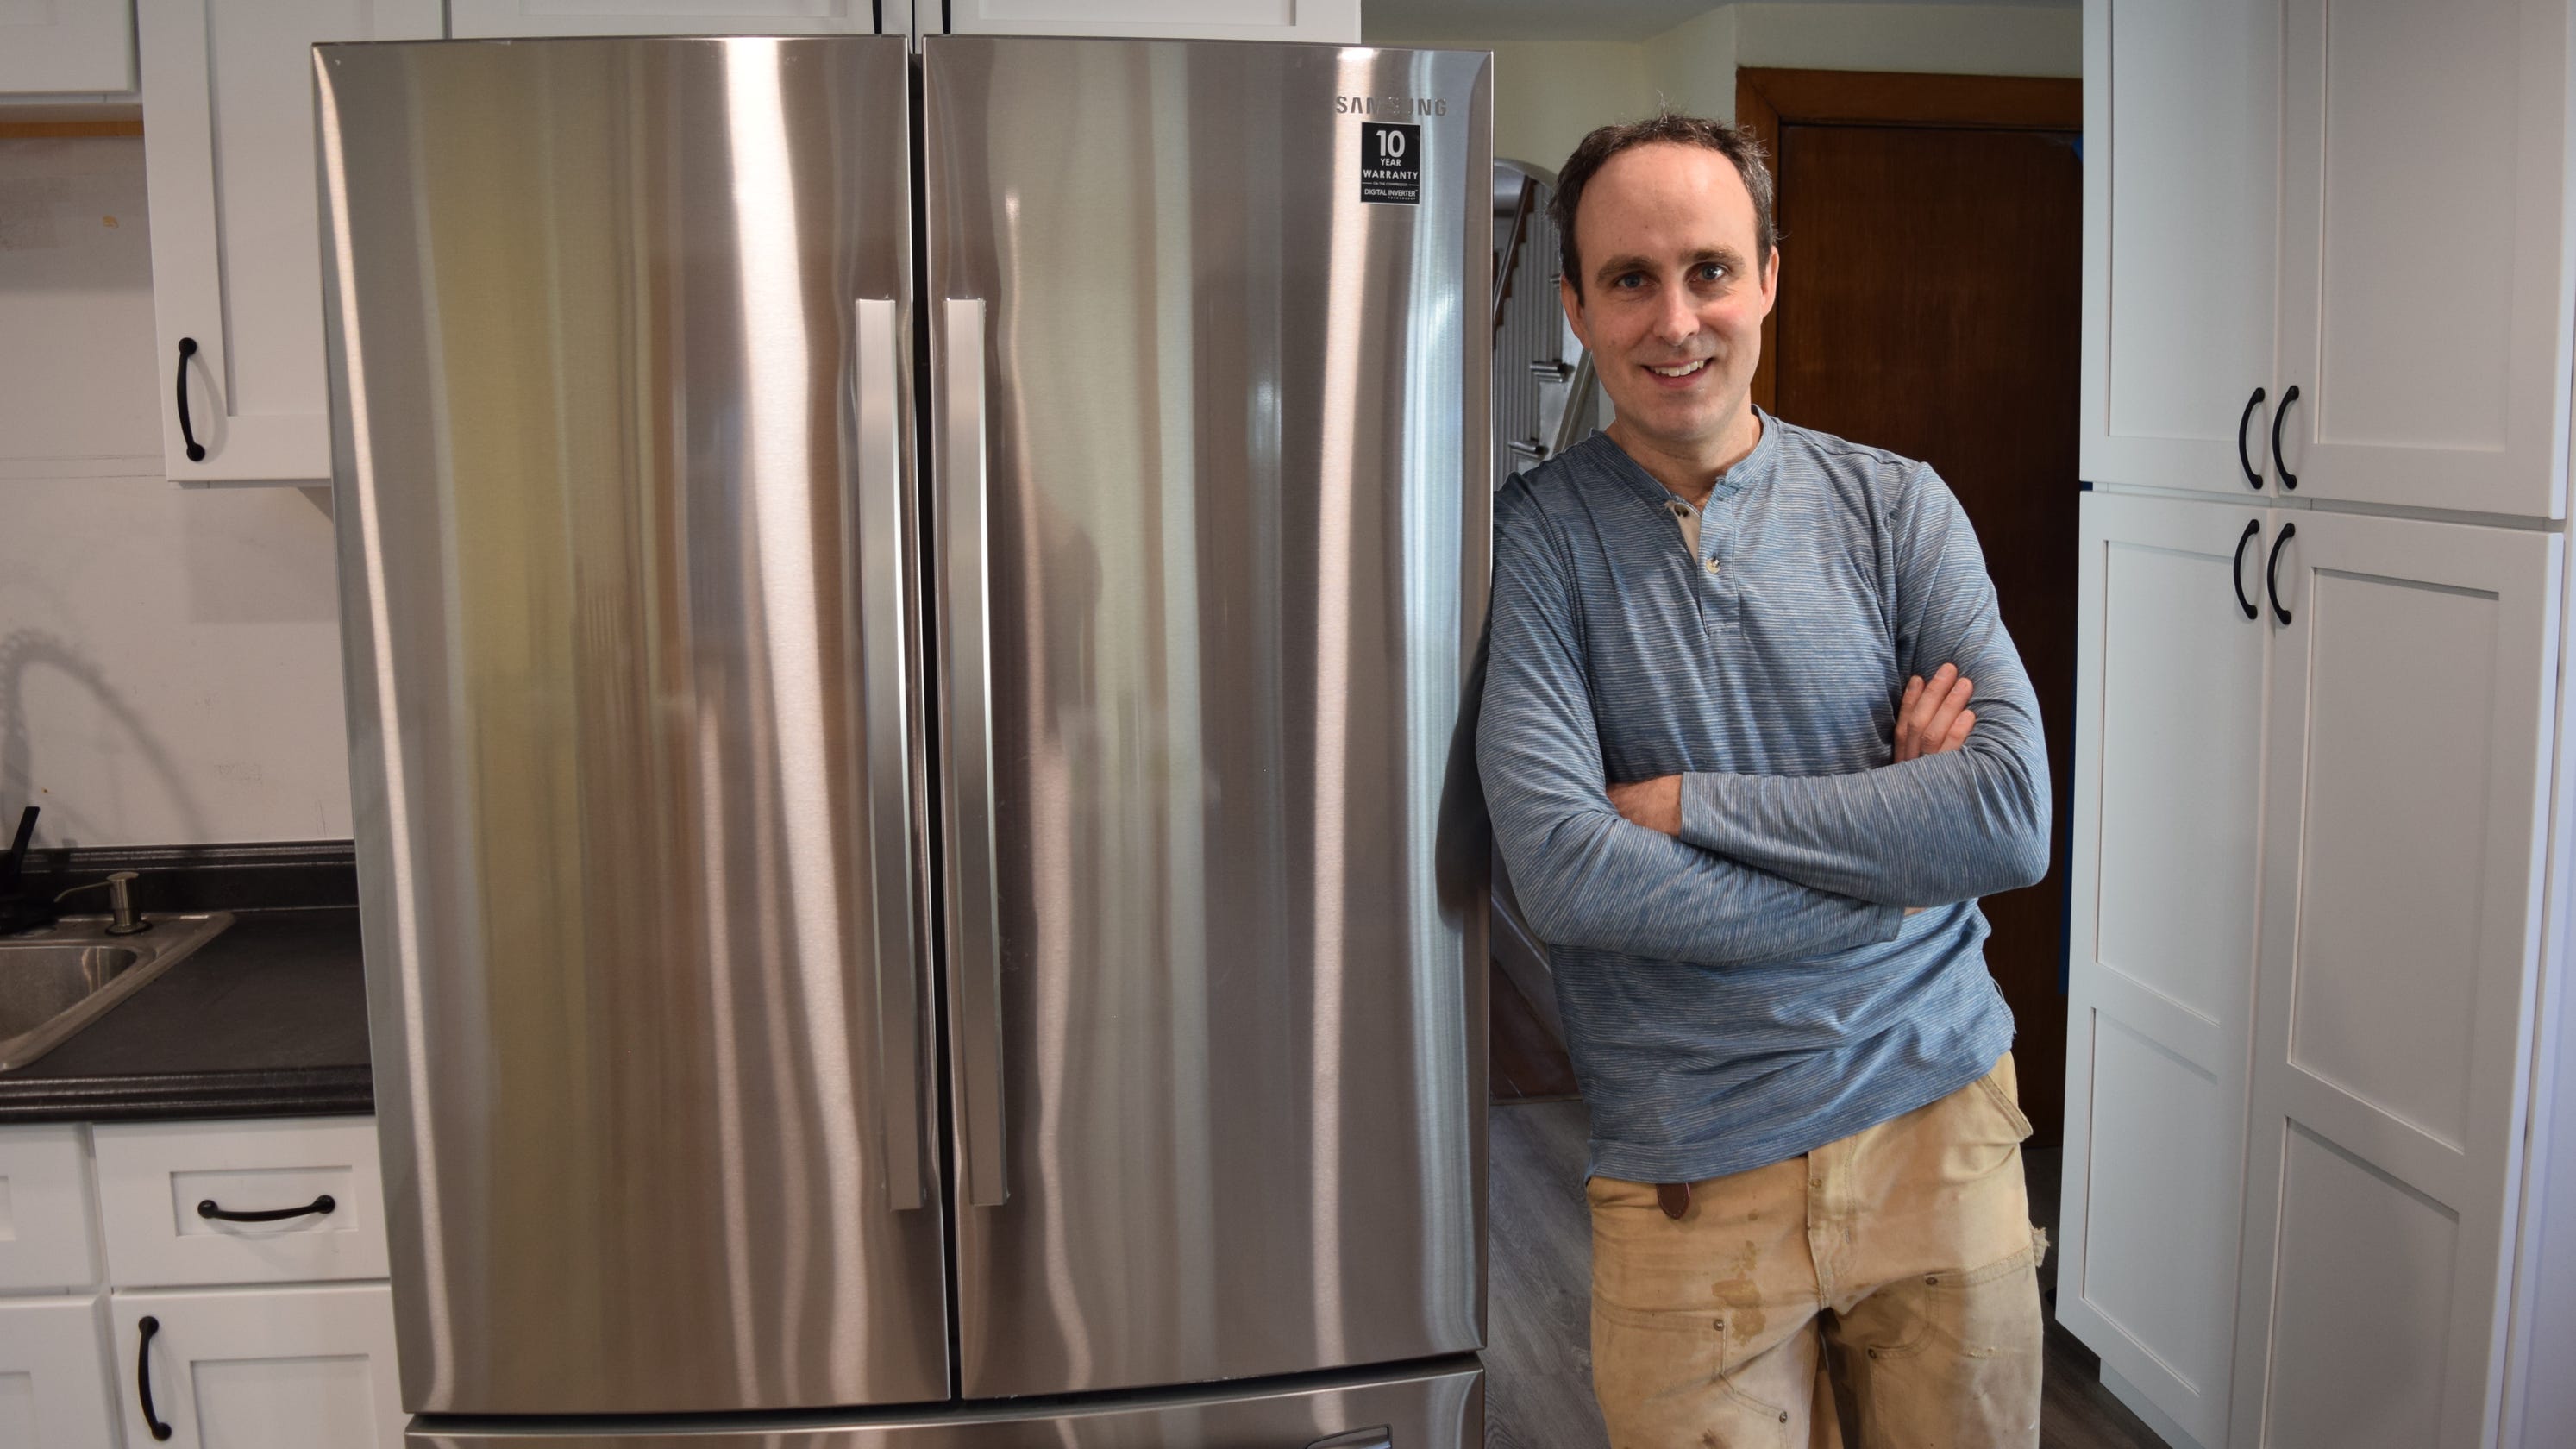 I tried to buy a climate-friendly refrigerator from GE. What I got was a carbon bomb.